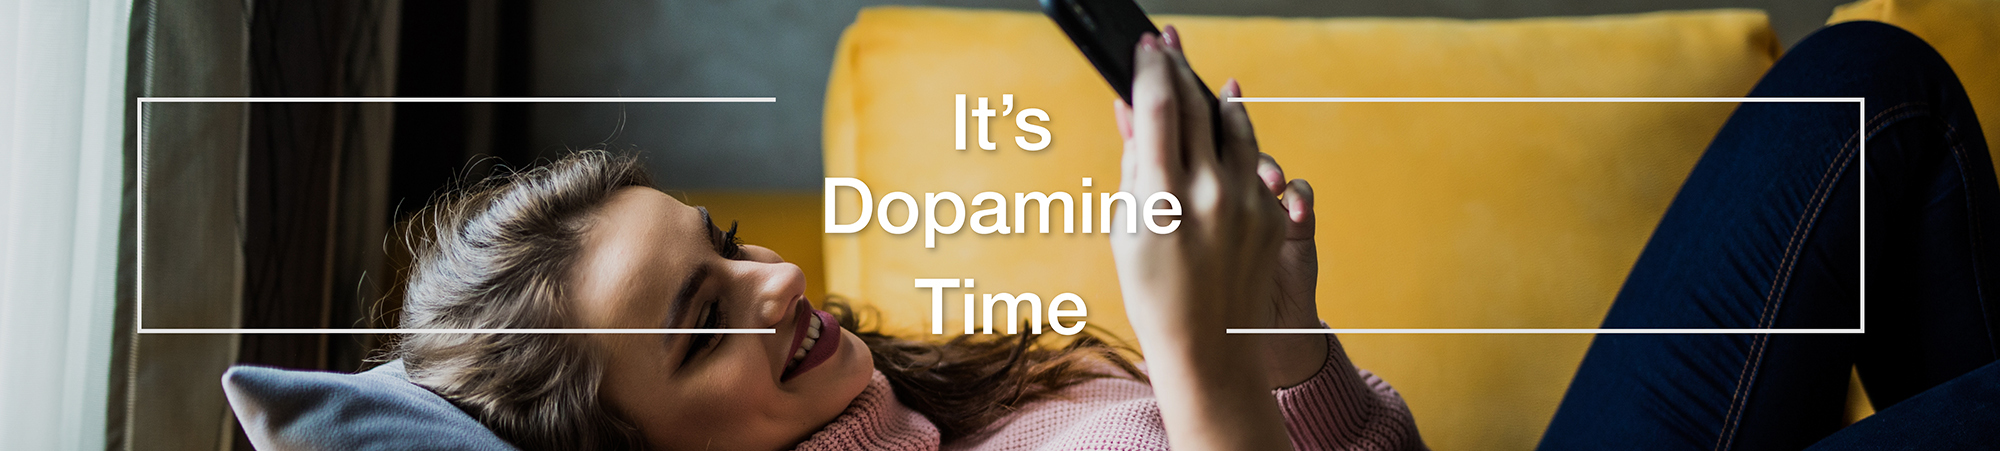 It's Dopamine Time Banner